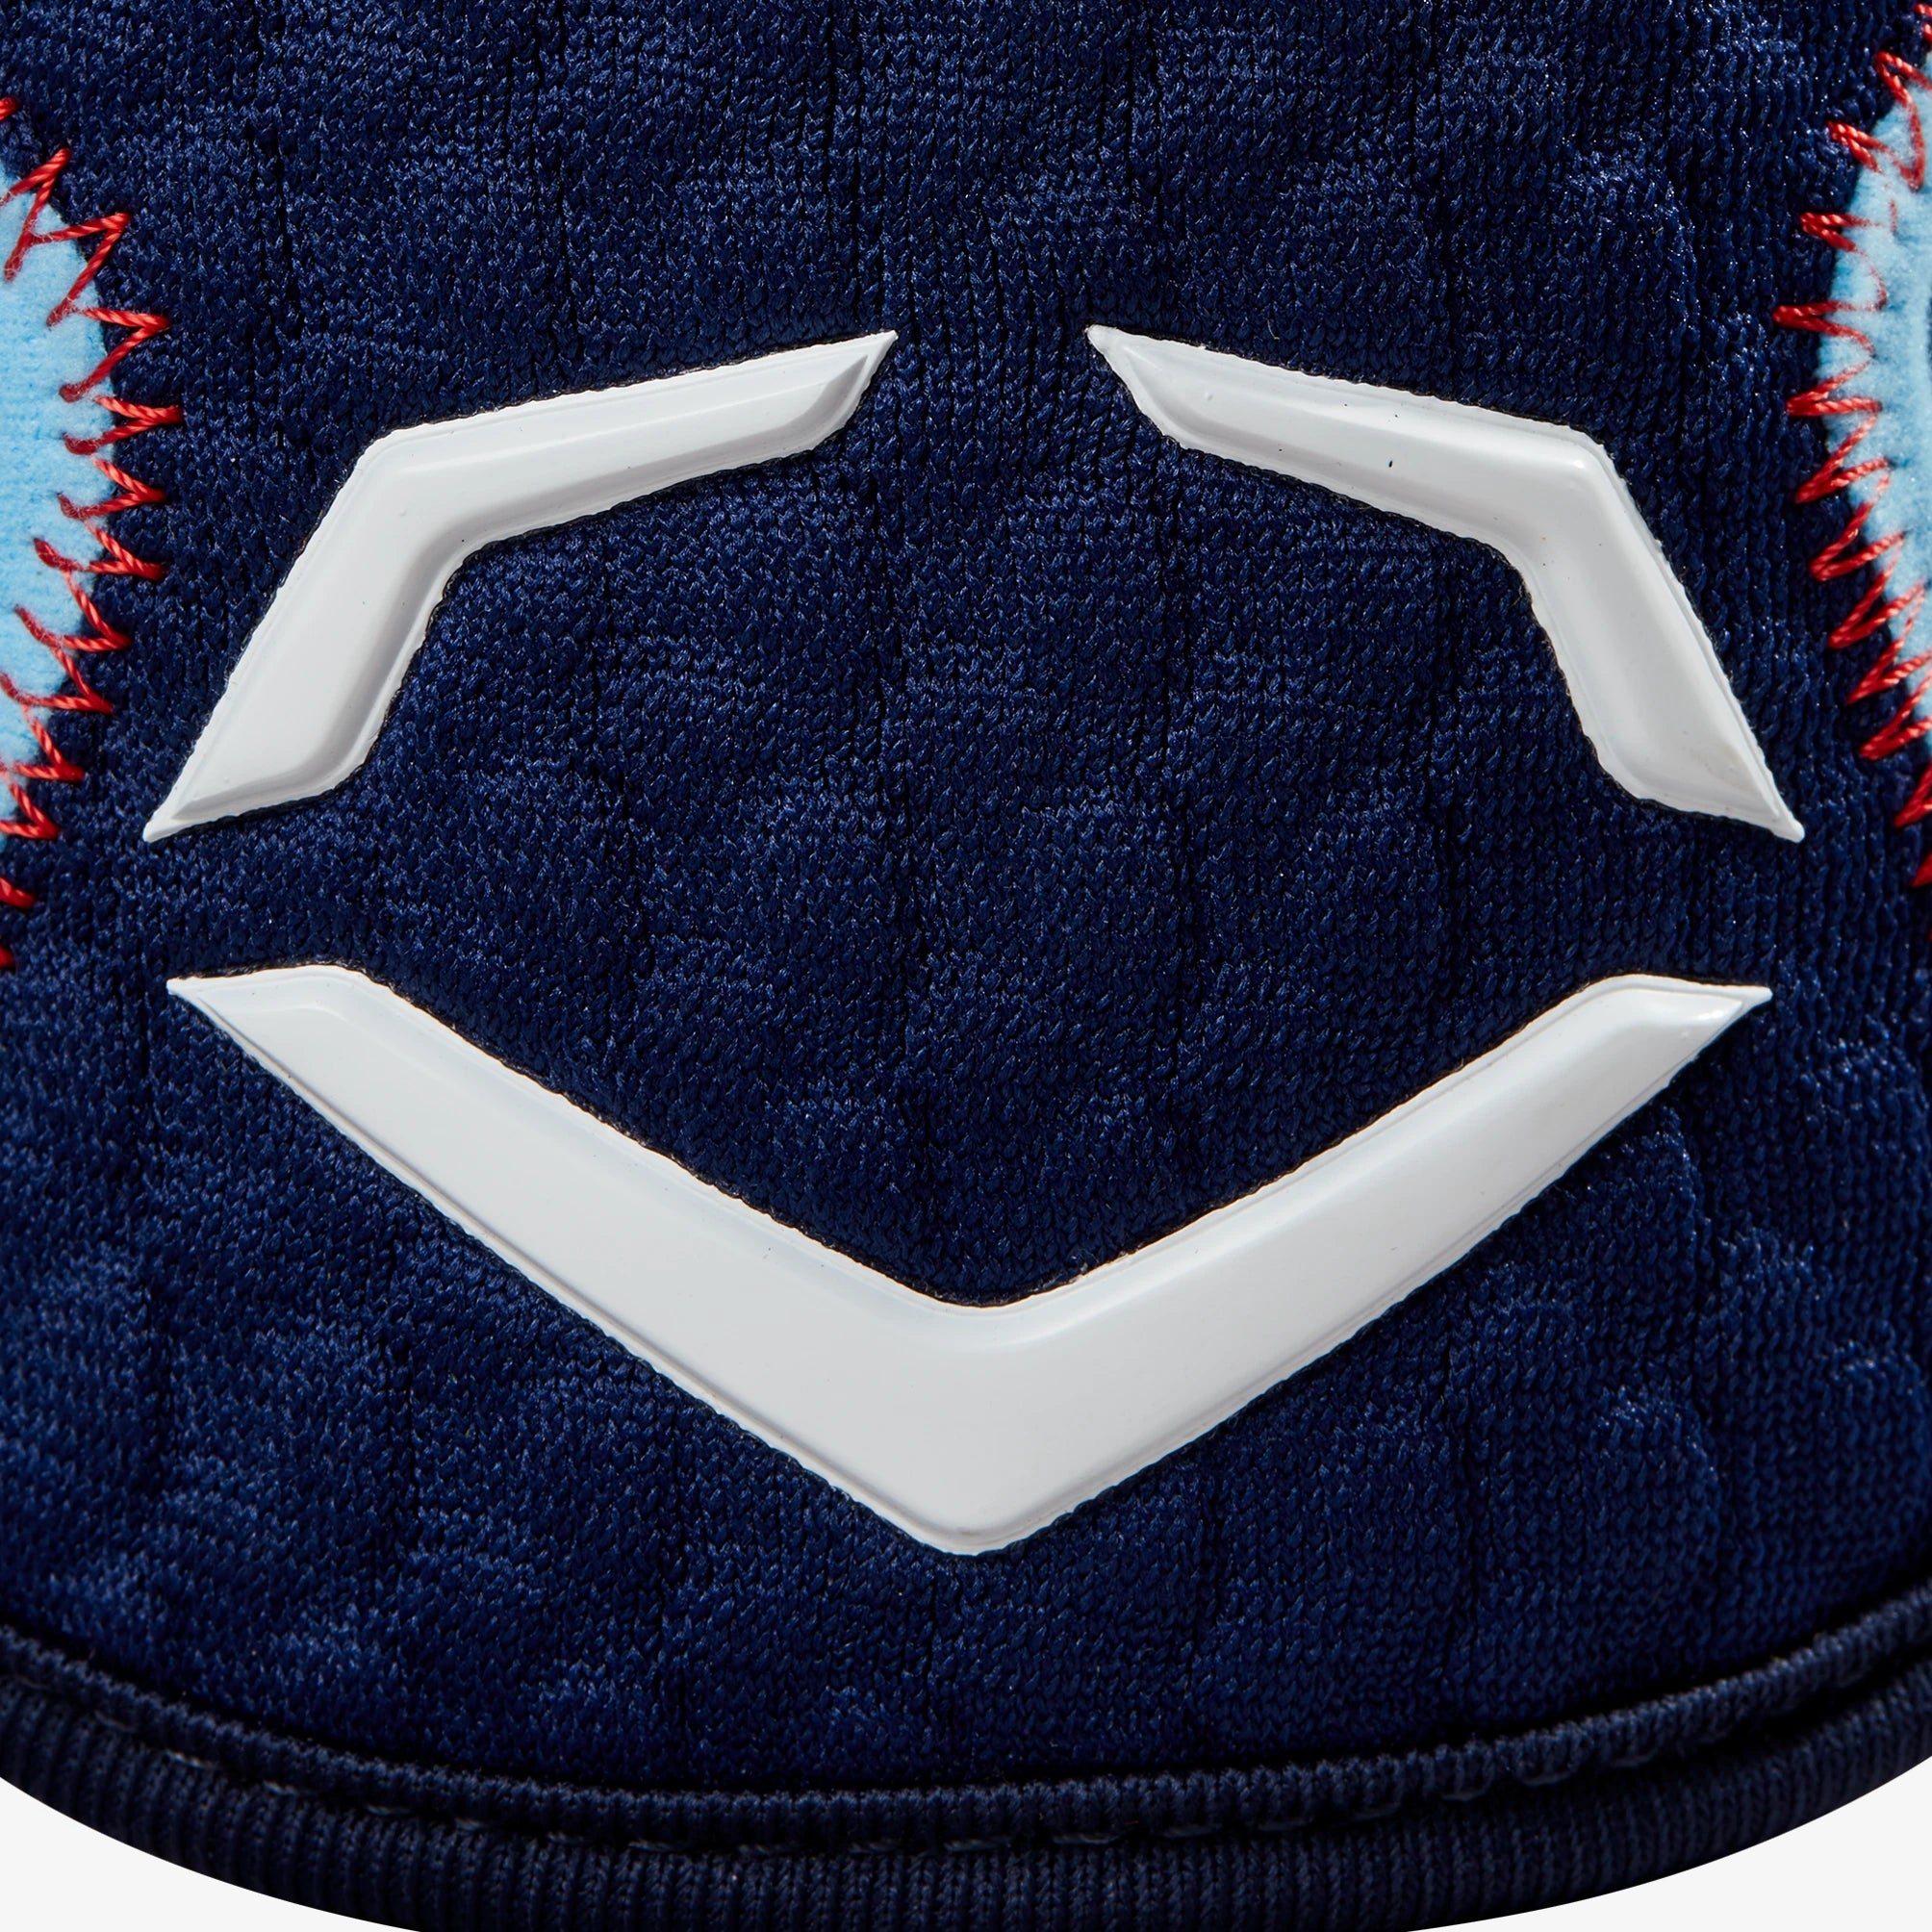 EvoShield PRO-SRZ 2.0 ON FIELD COLLECTION BATTER'S ELBOW GUARD: CUBS